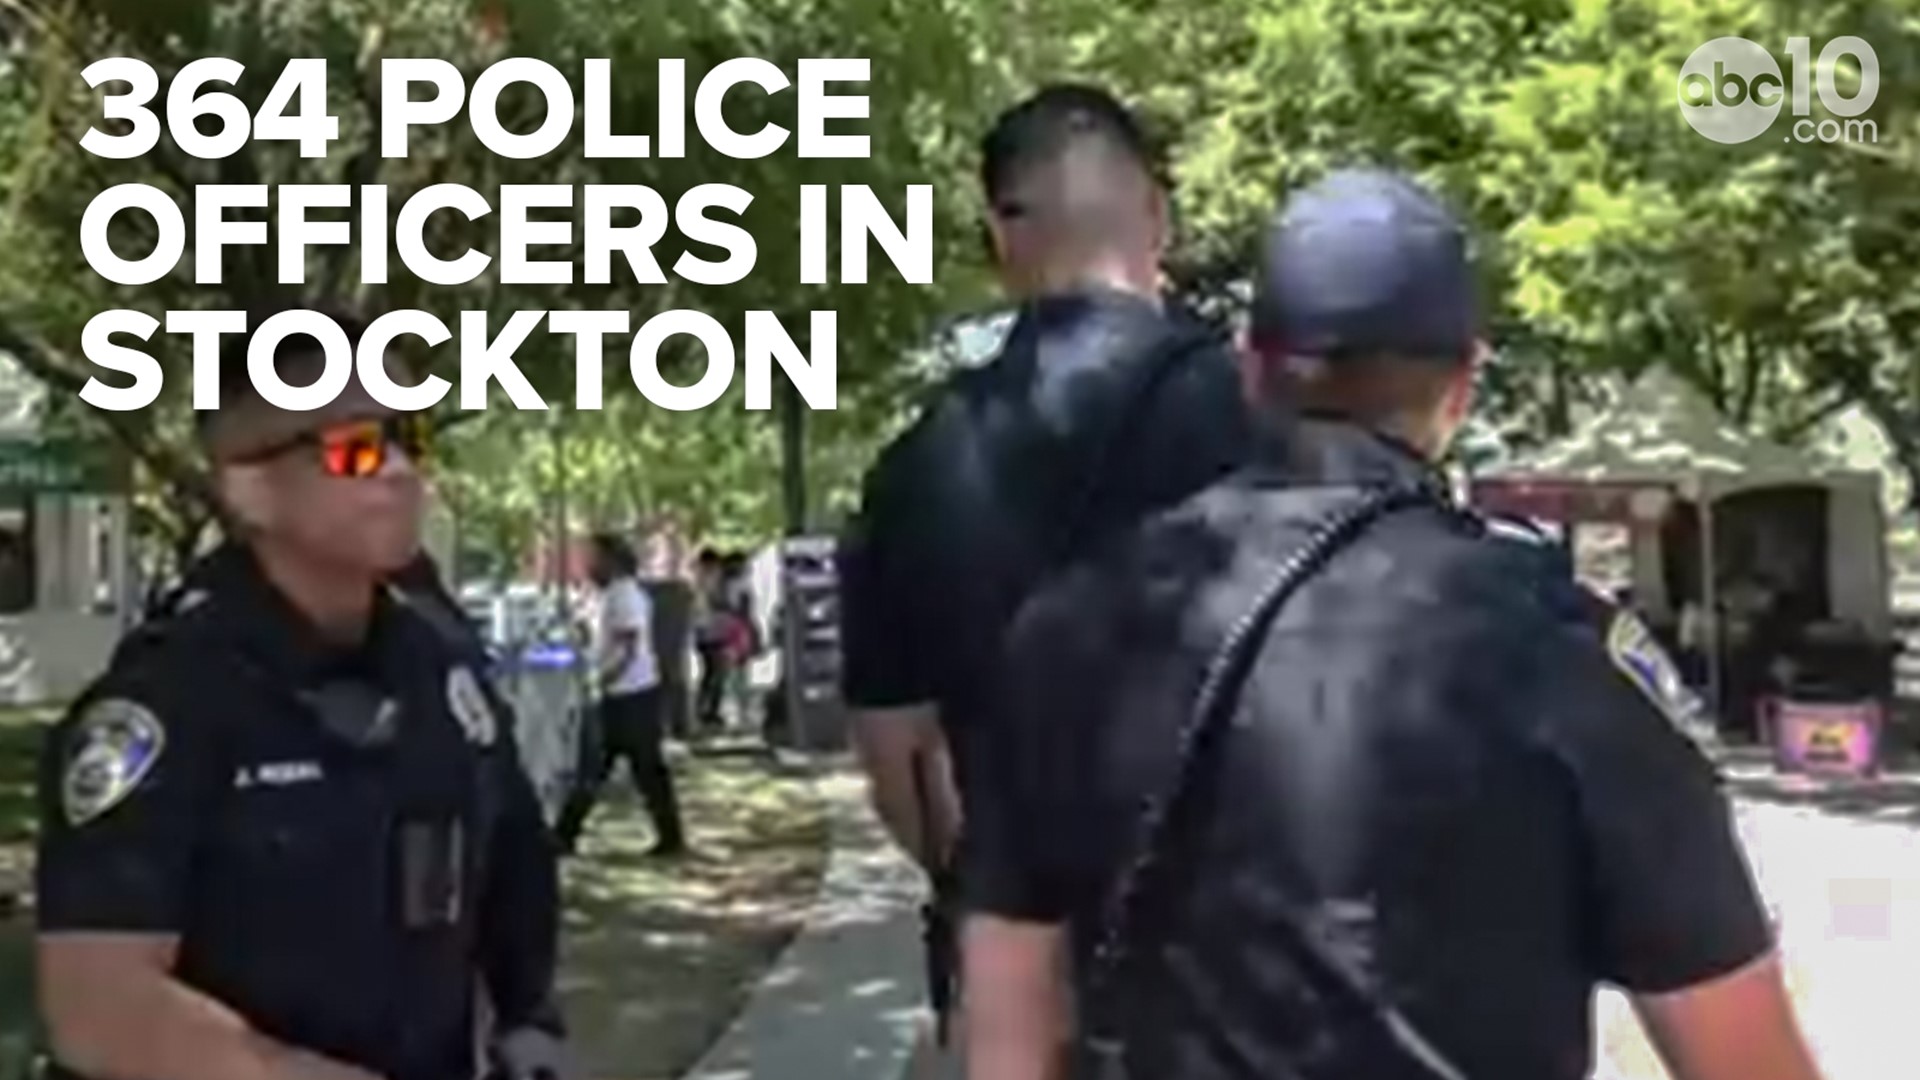 Though the Stockton Police Department has 364 officers currently, they are still short about 100 as crime in the city continues.